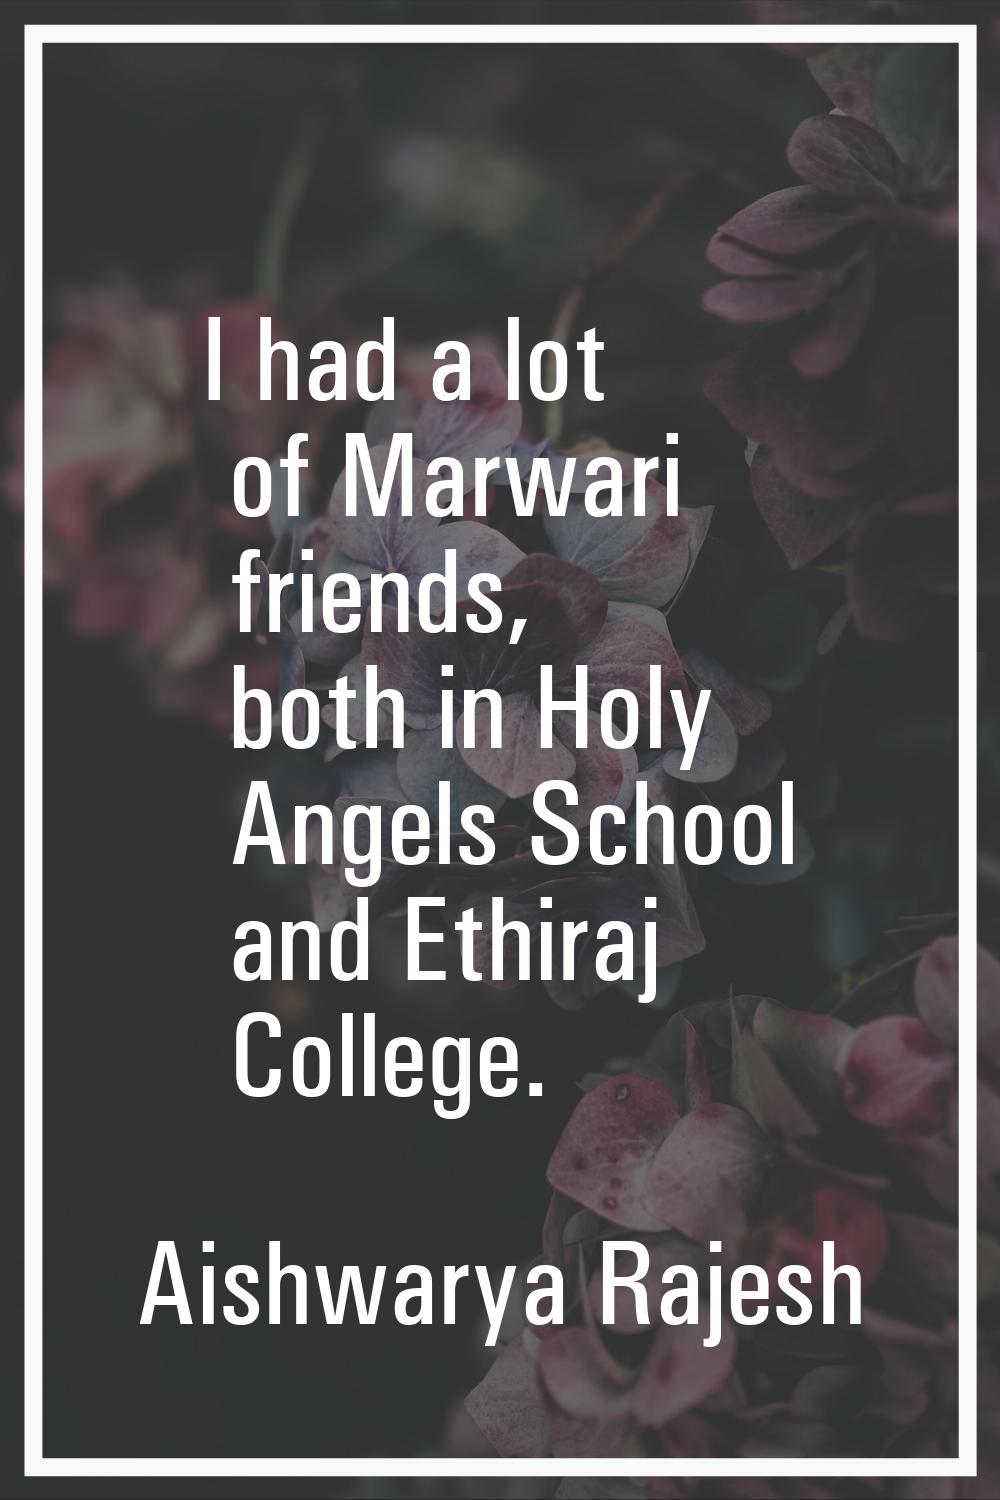 I had a lot of Marwari friends, both in Holy Angels School and Ethiraj College.